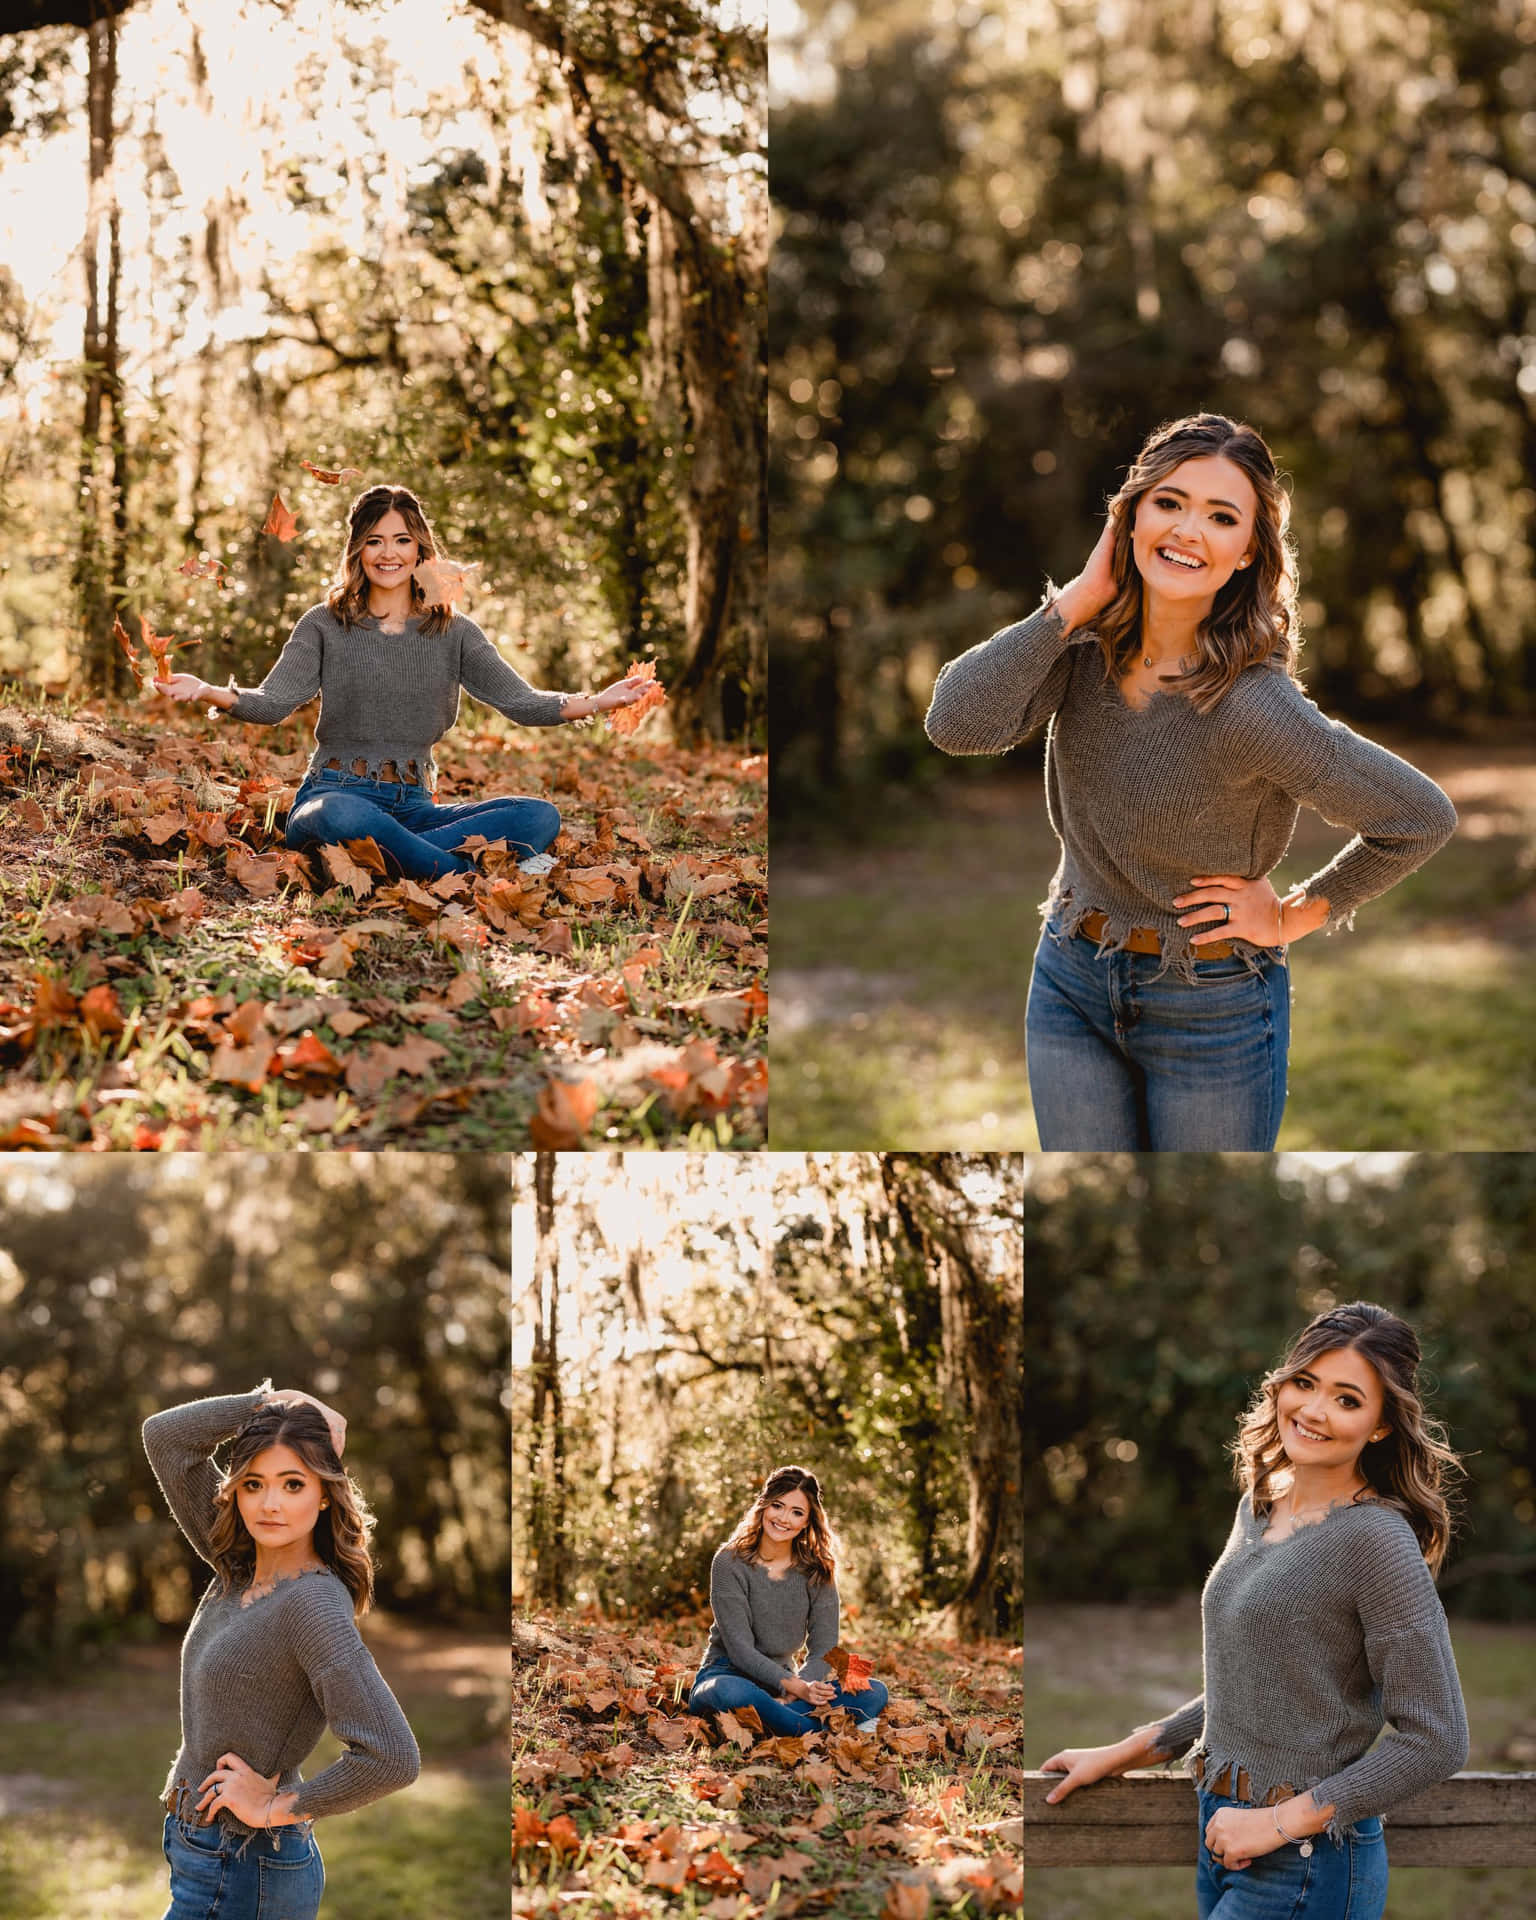 A Girl In A Gray Sweater Poses In The Woods